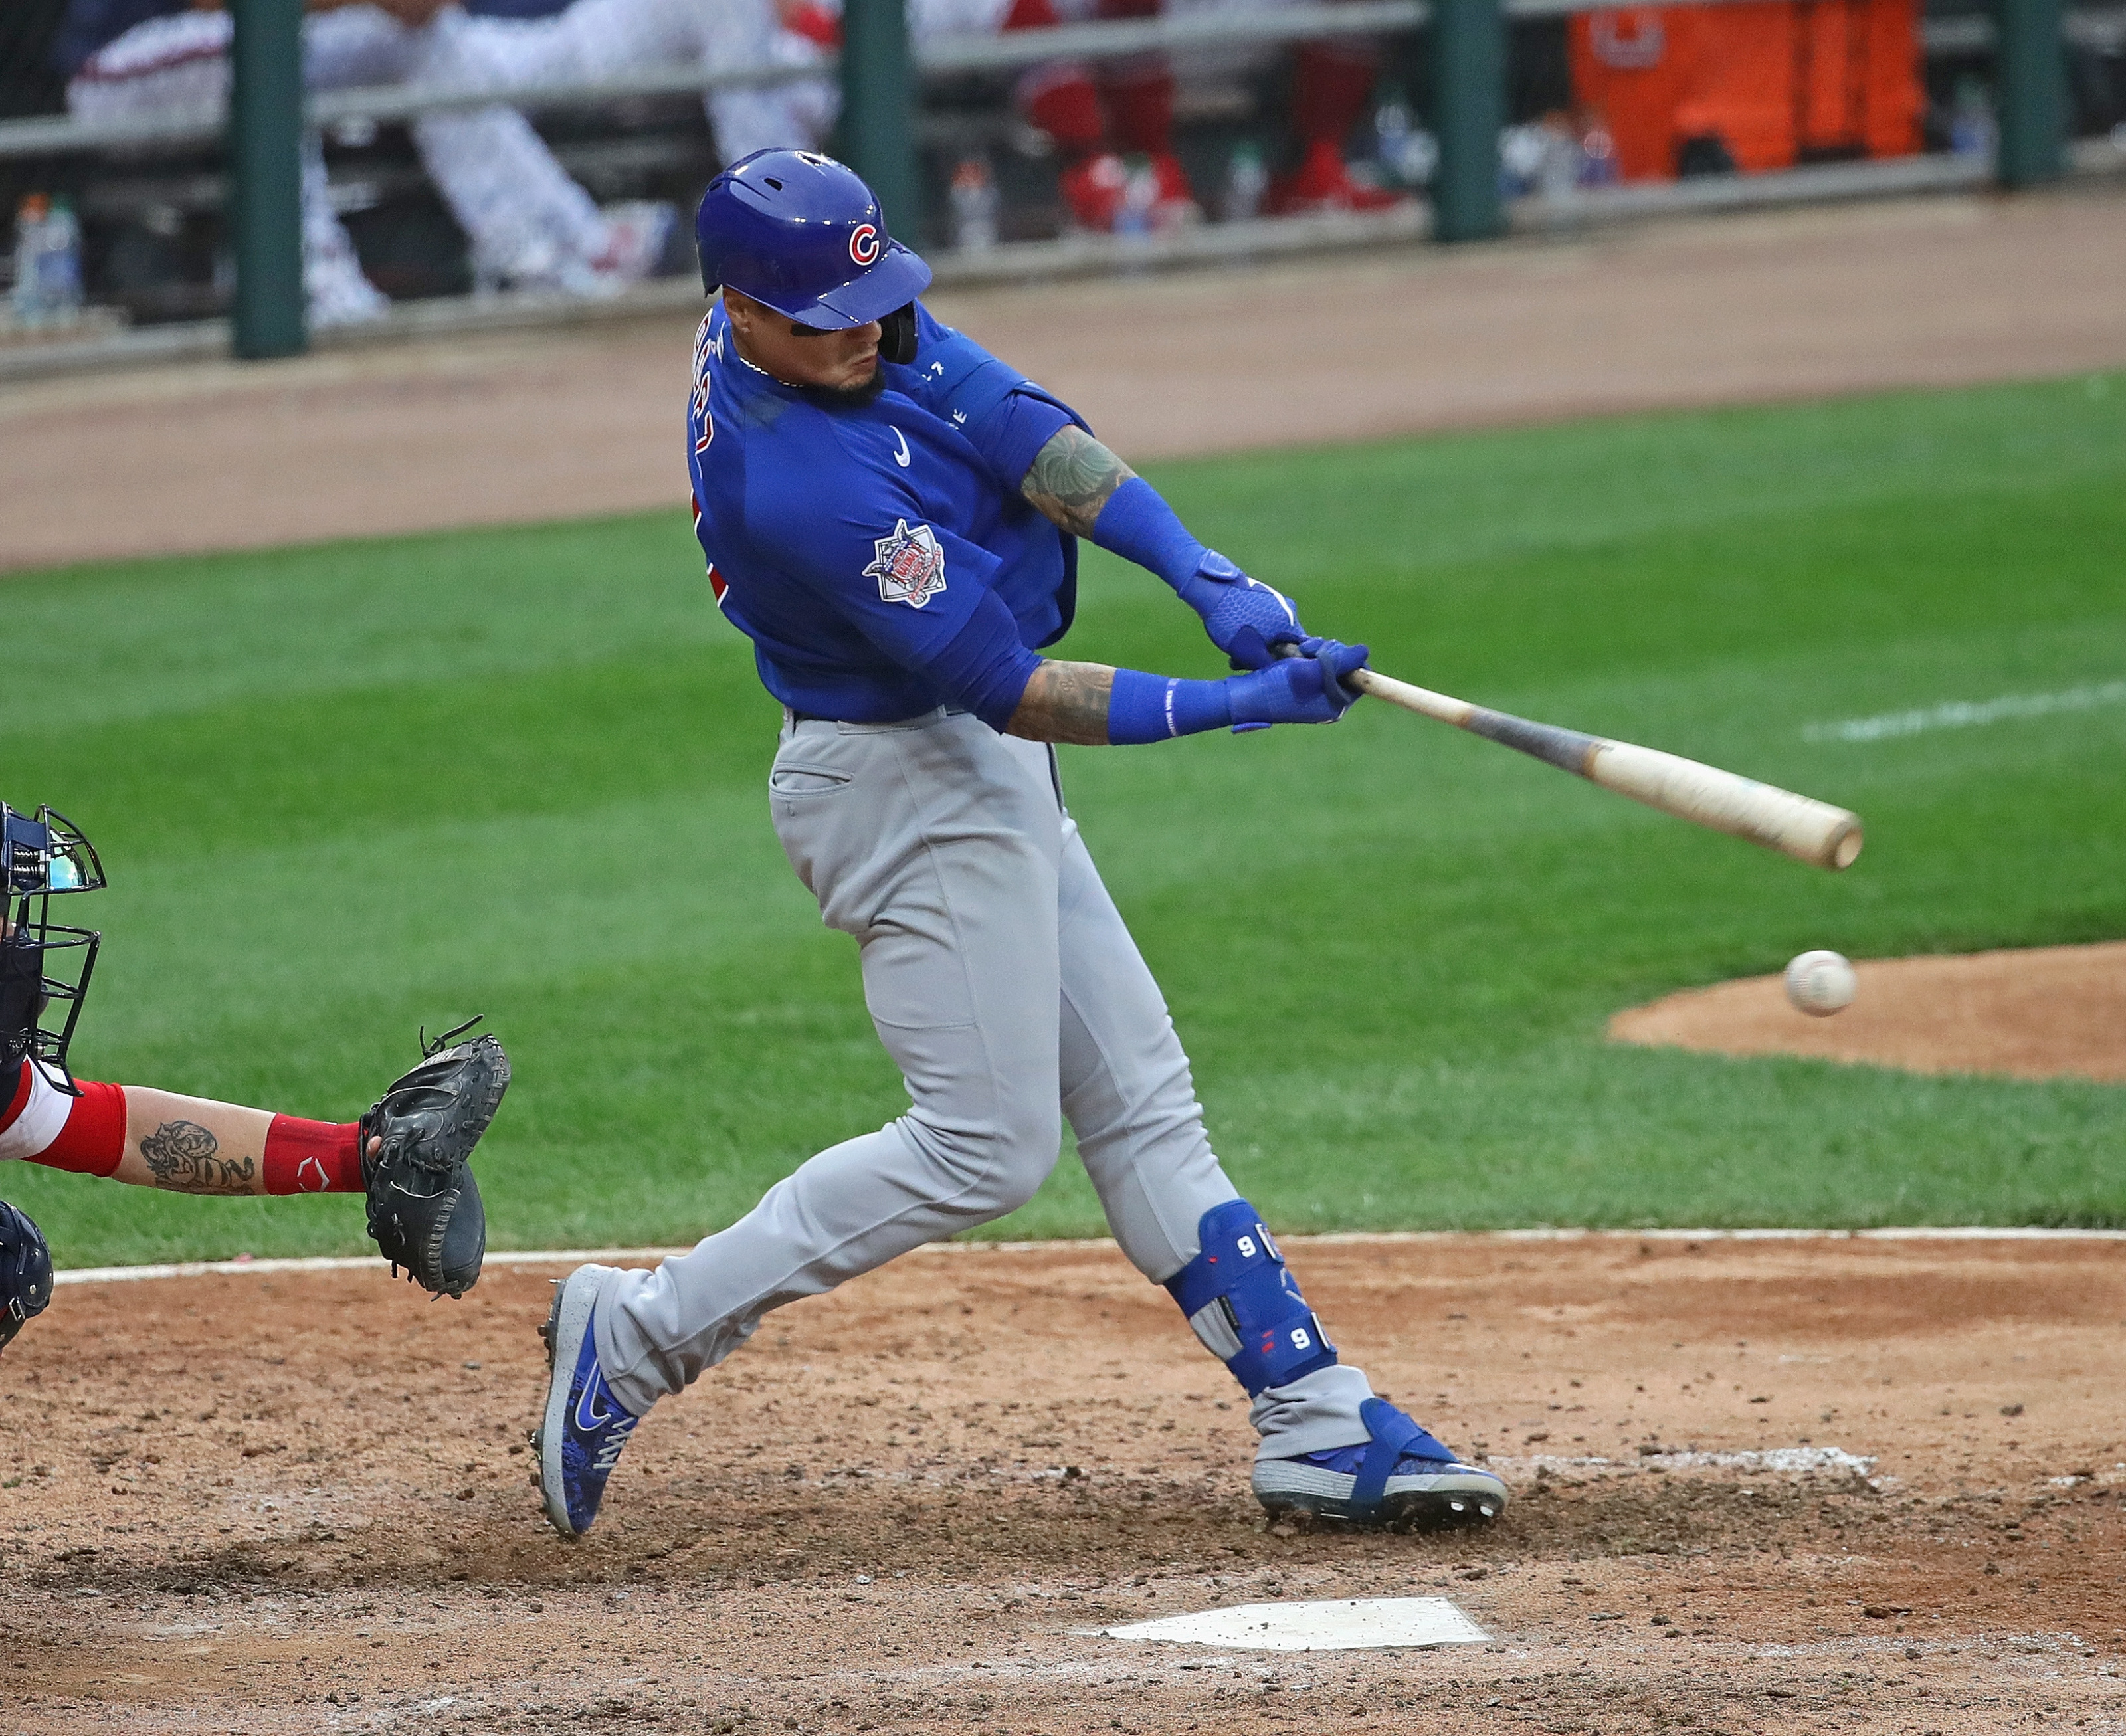 Cubs, Loaded With Talent, May Get Kyle Schwarber Back, Too - The